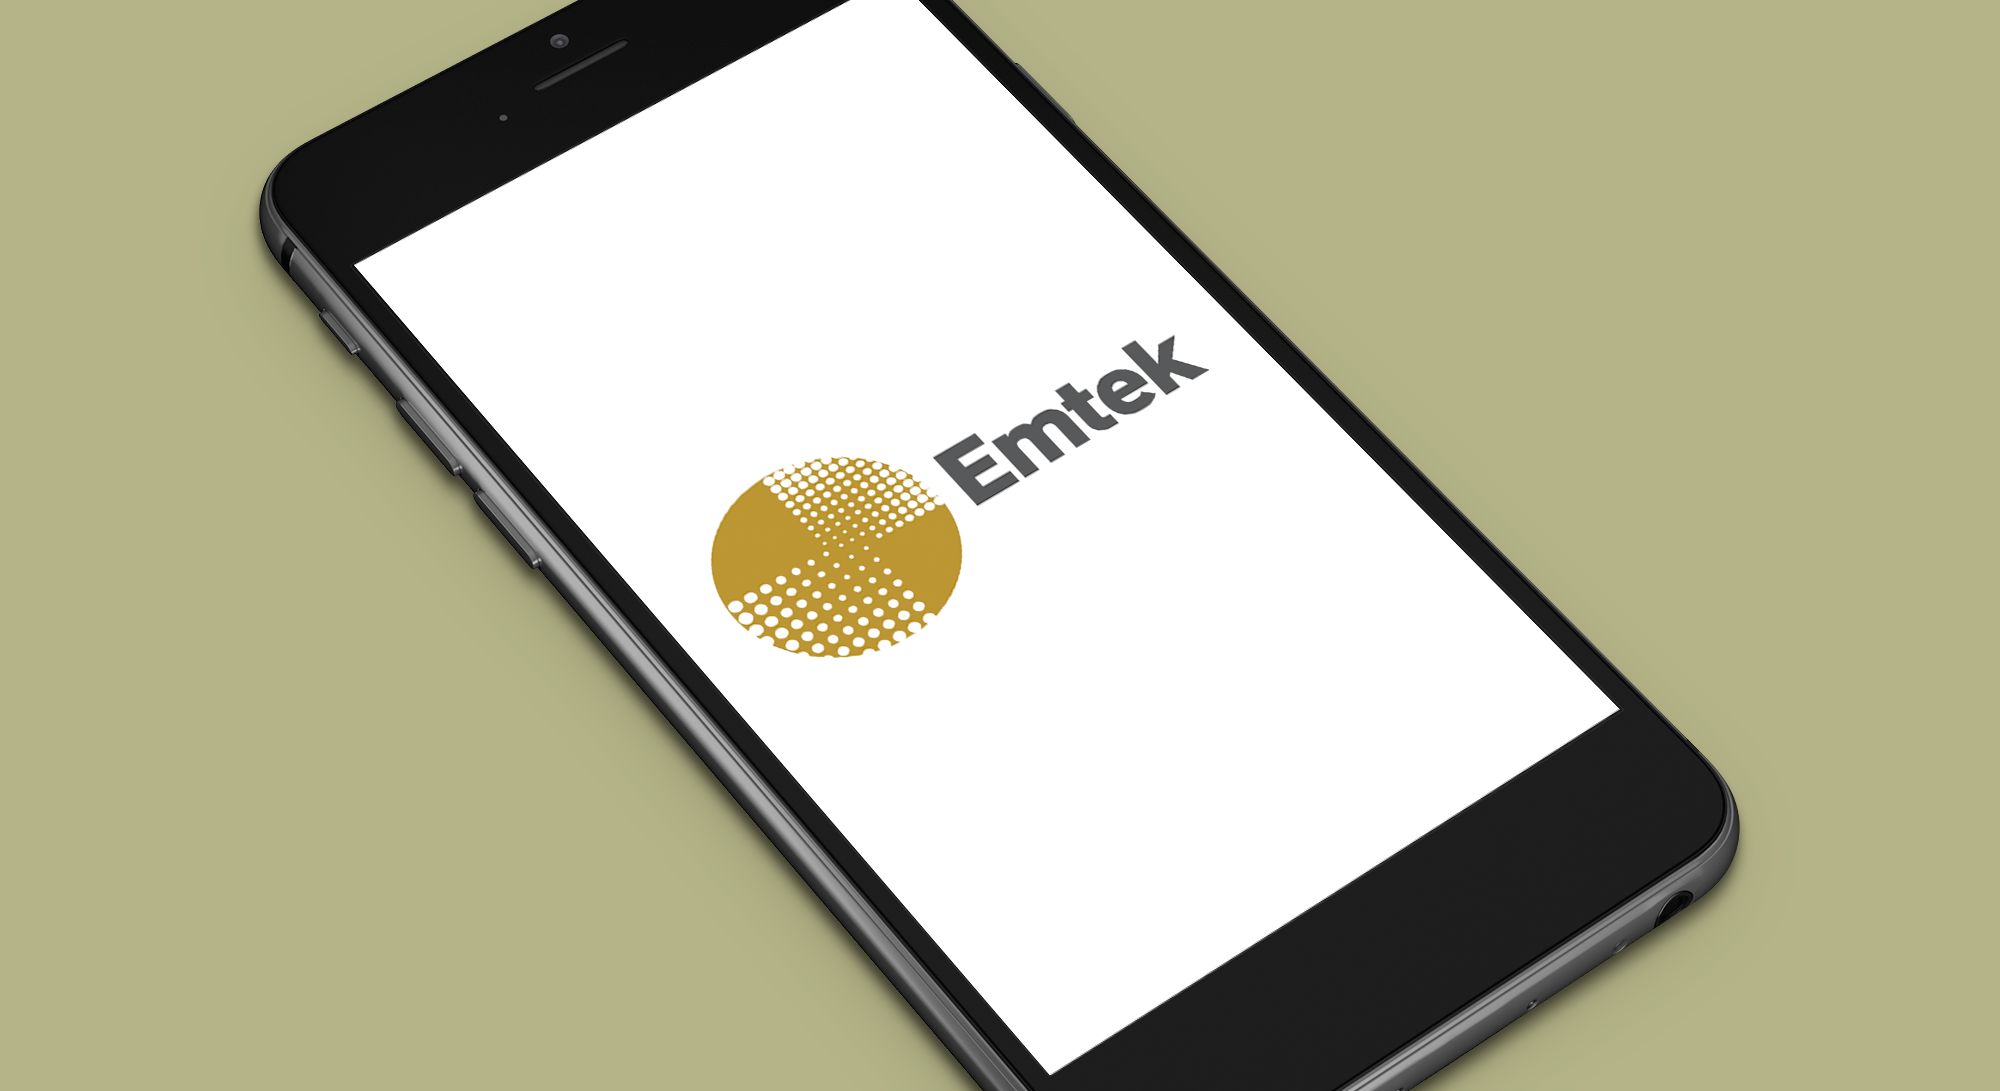 There’s room for more players in Indonesia’s payment space: Emtek's Daniswara